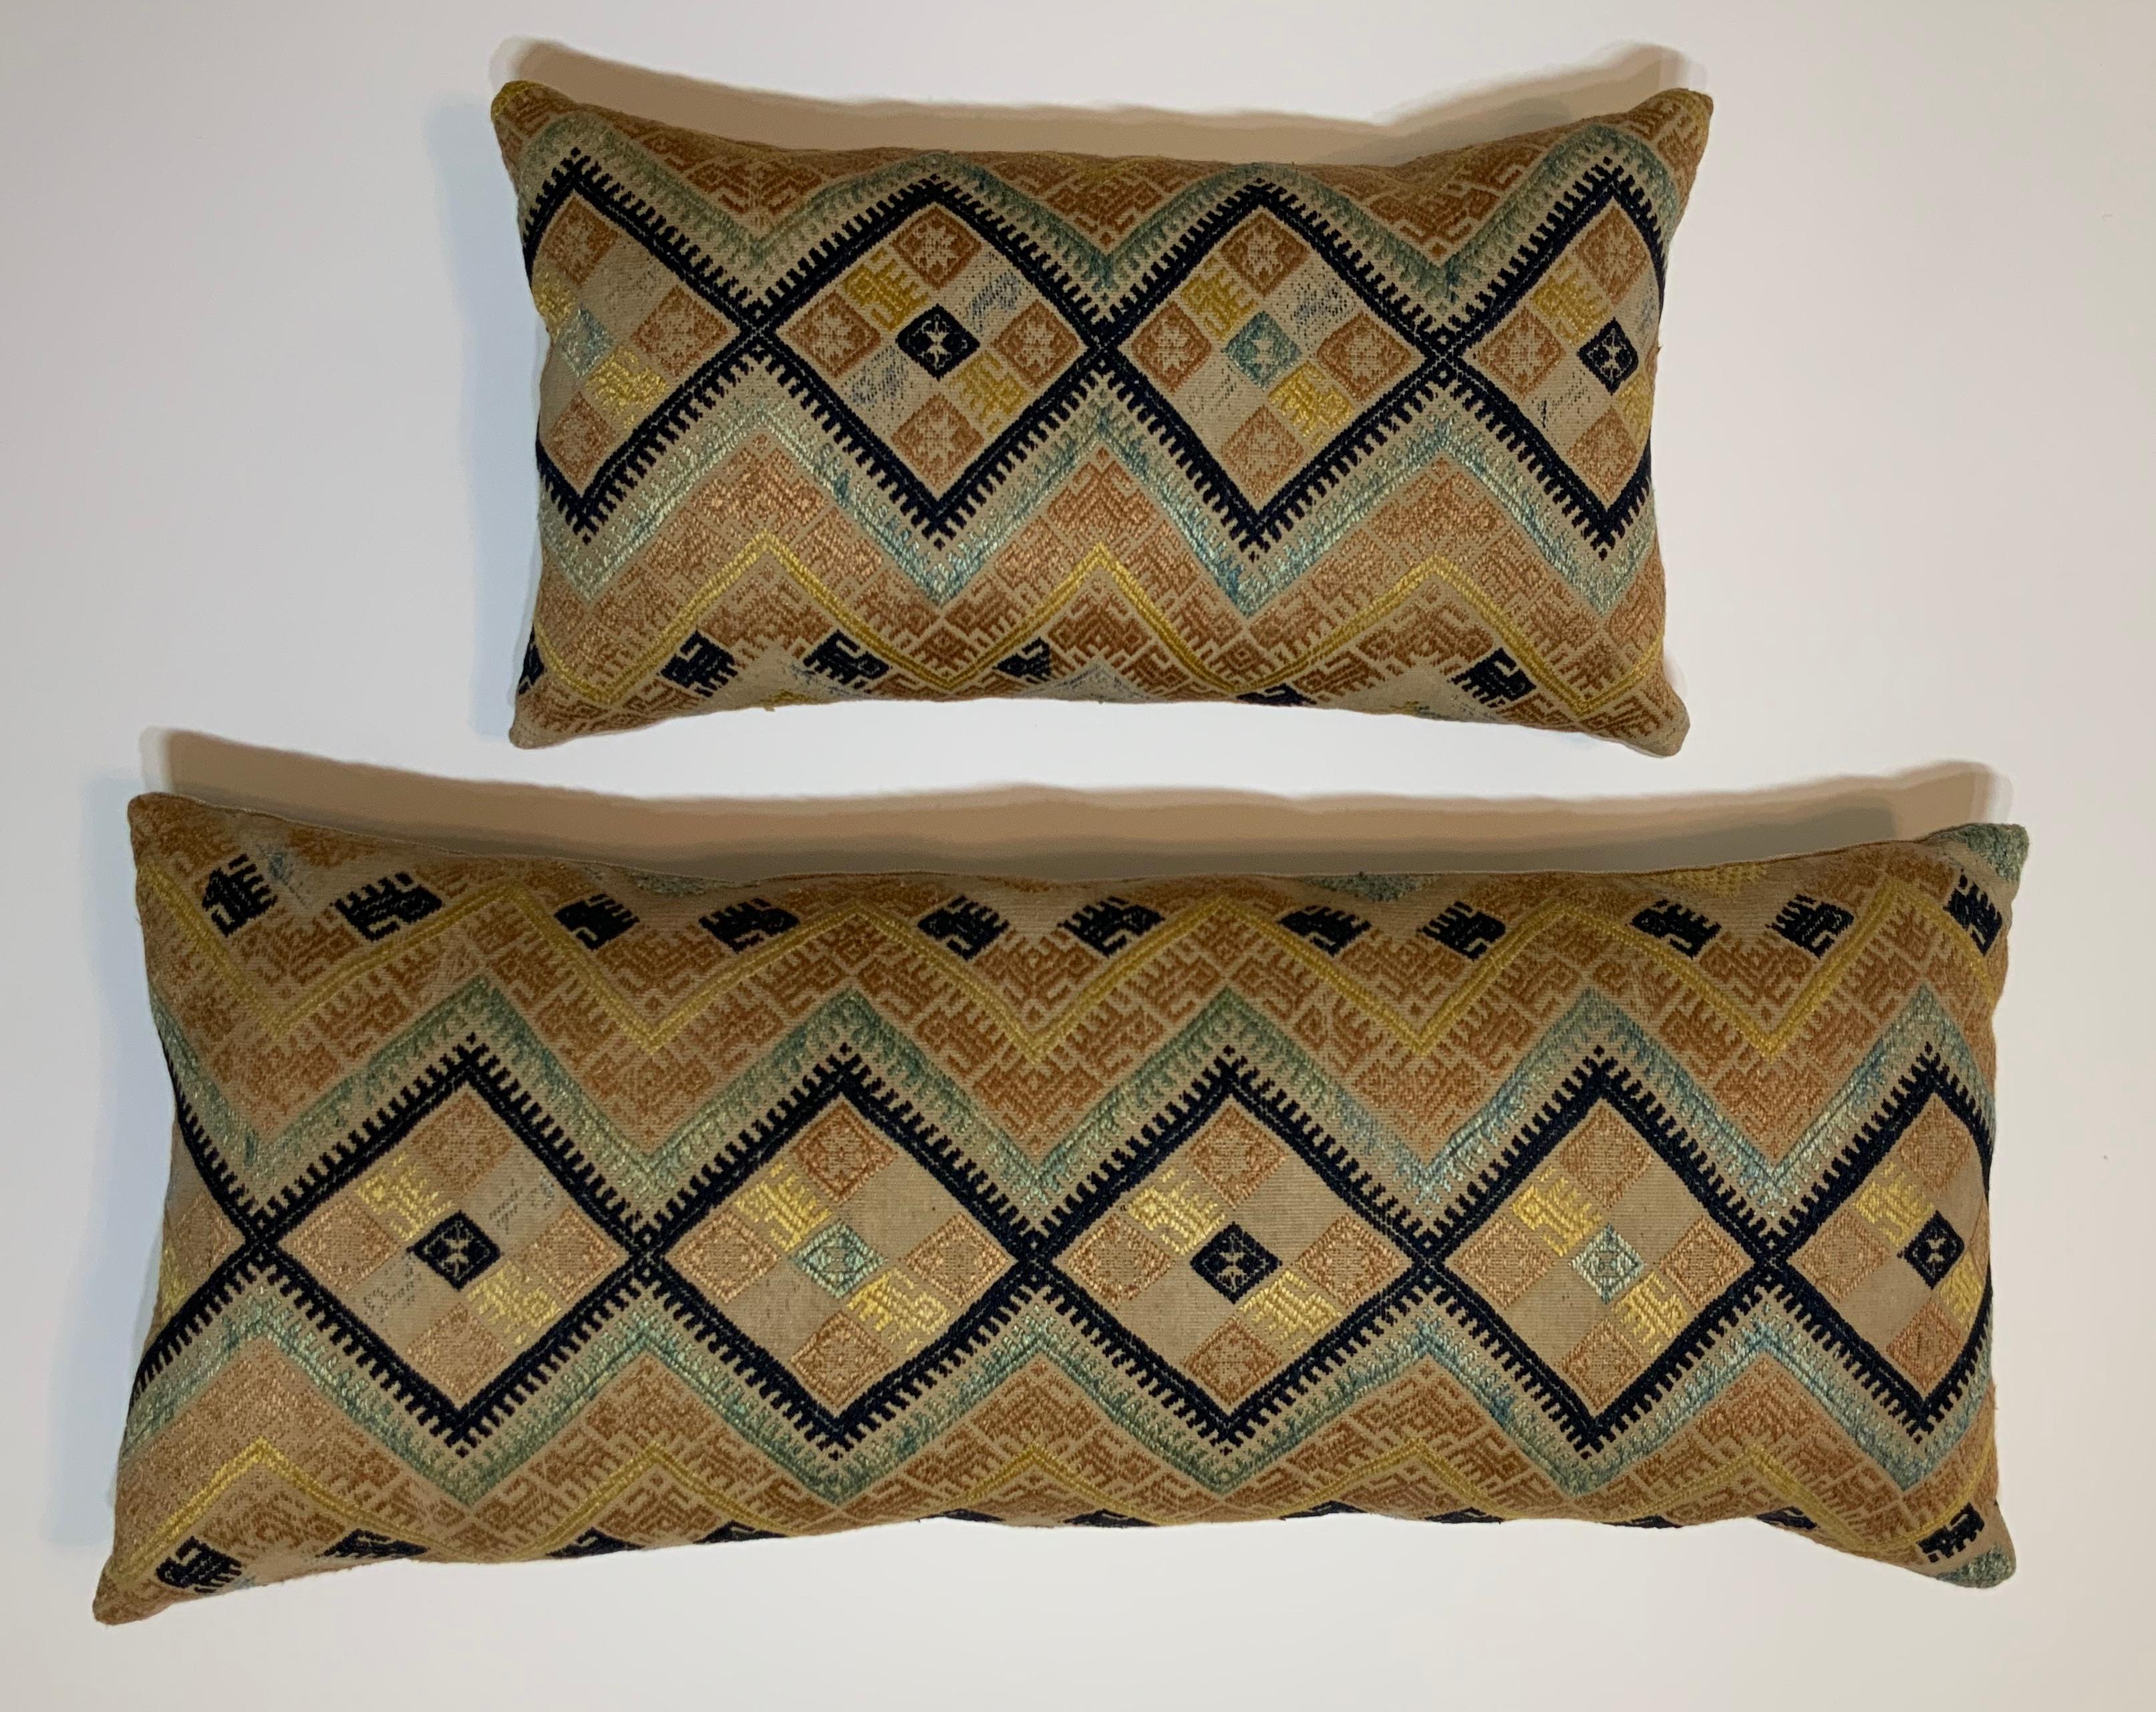 Beautiful pair of pillows made of hand embroidery silk on cotton cream color background. Primitive geometric and lions motifs. Linen backing, fresh inserts.
Sizes 
Measures: 17” x 9”.5 x 5”
27” x 11” x 5”.